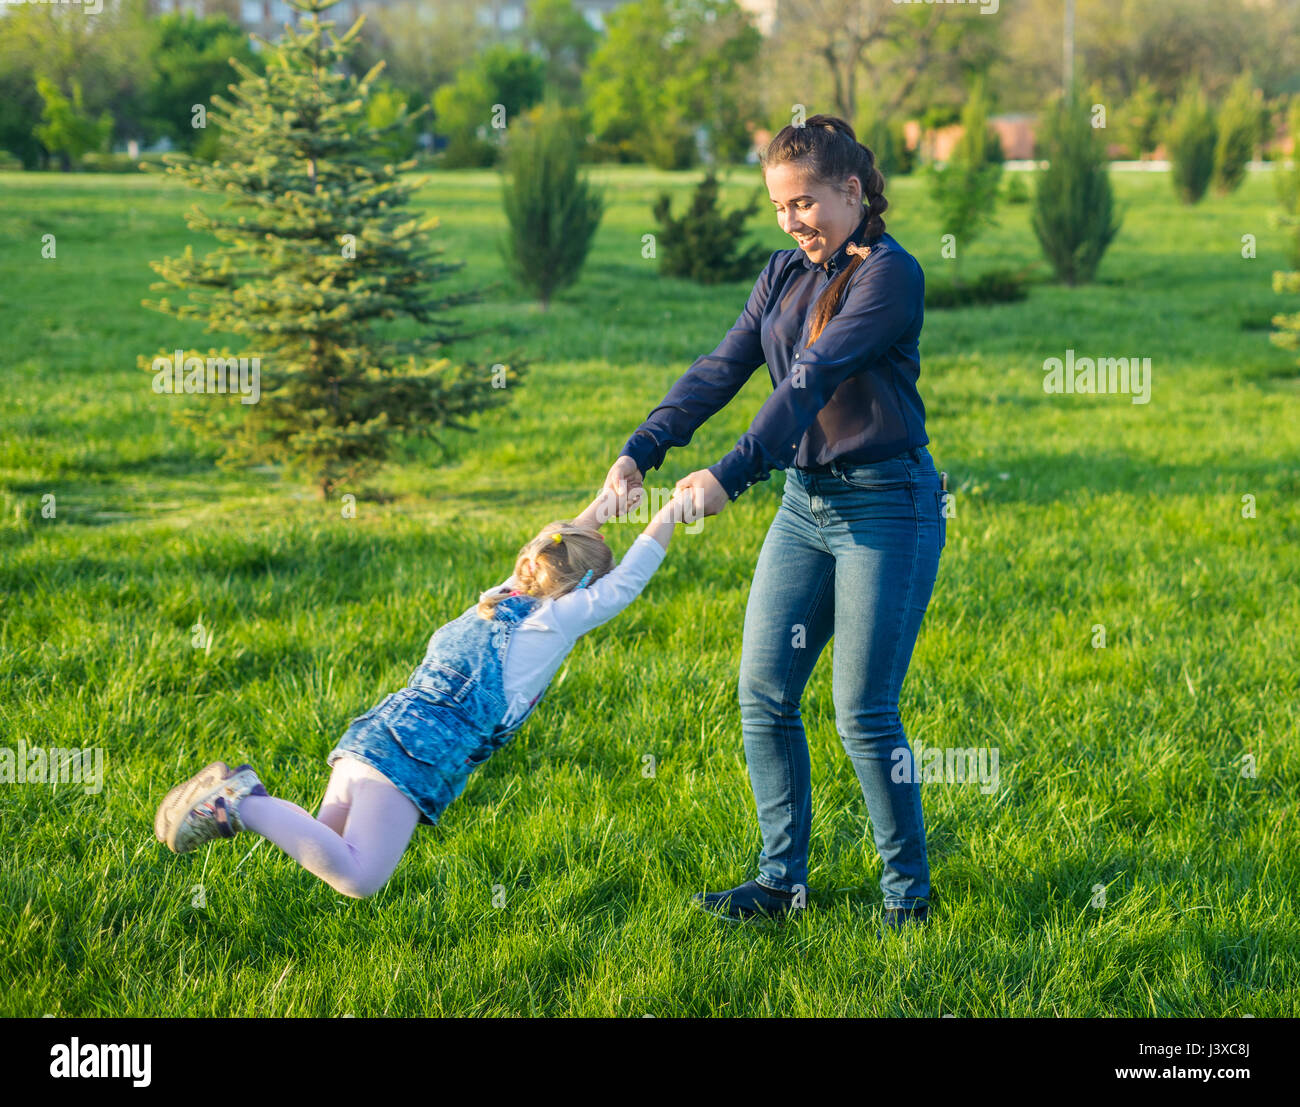 Beautiful mother lifts girl and begins turning her around Stock Photo